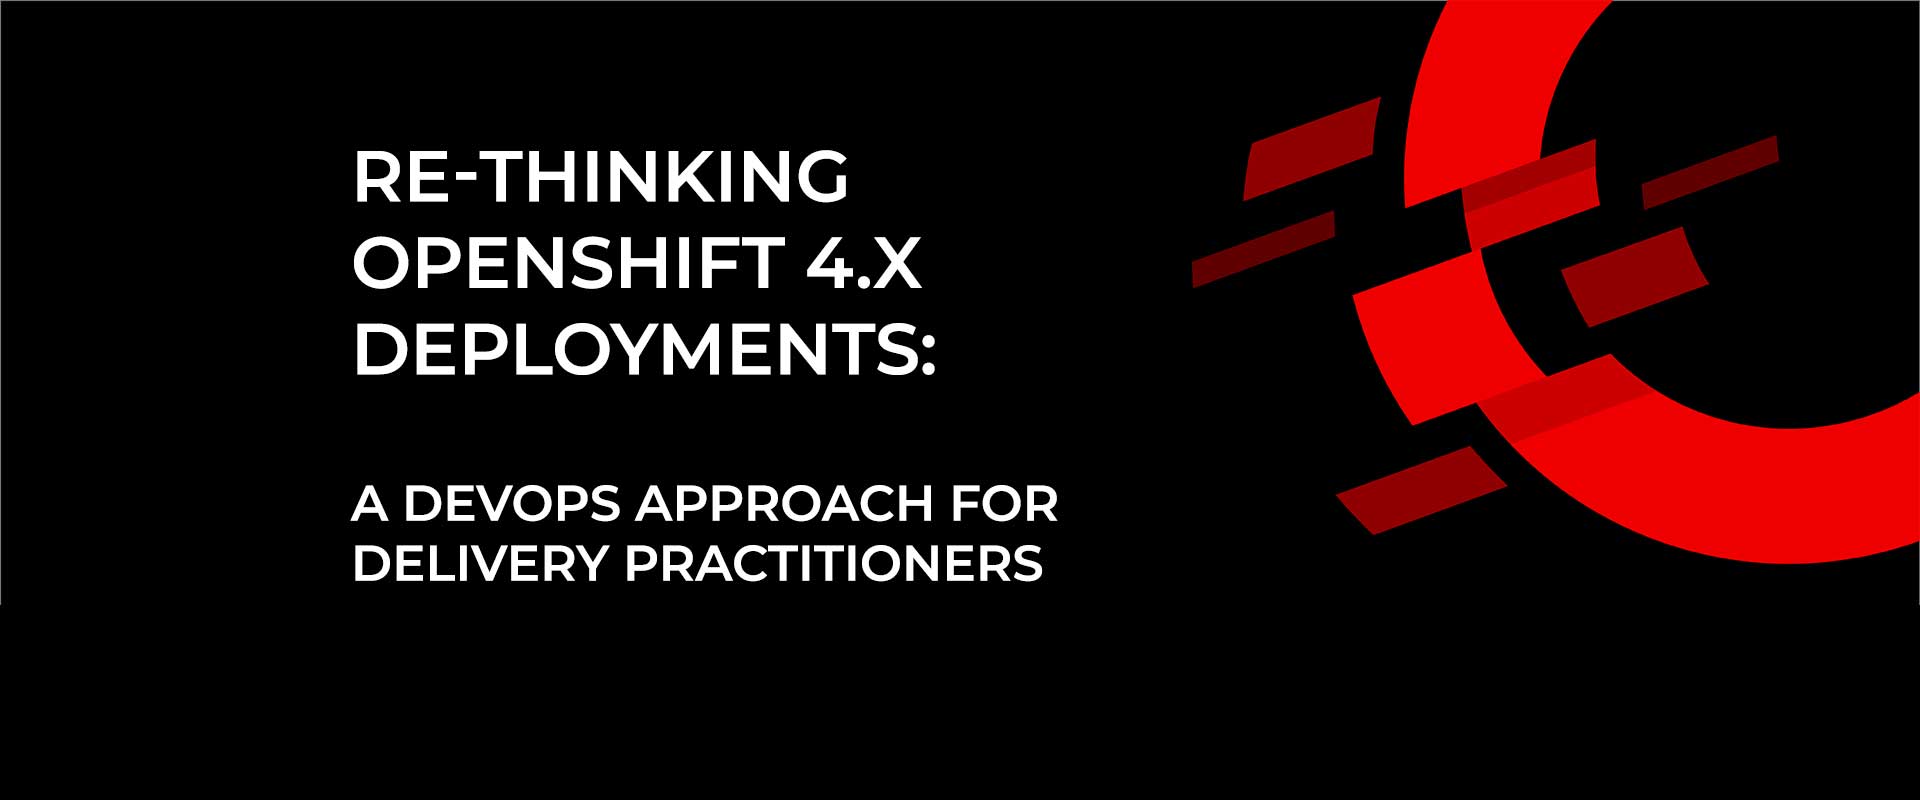 Re-thinking OpenShift 4.X Deployments: A DevOps approach for Delivery Practitioners